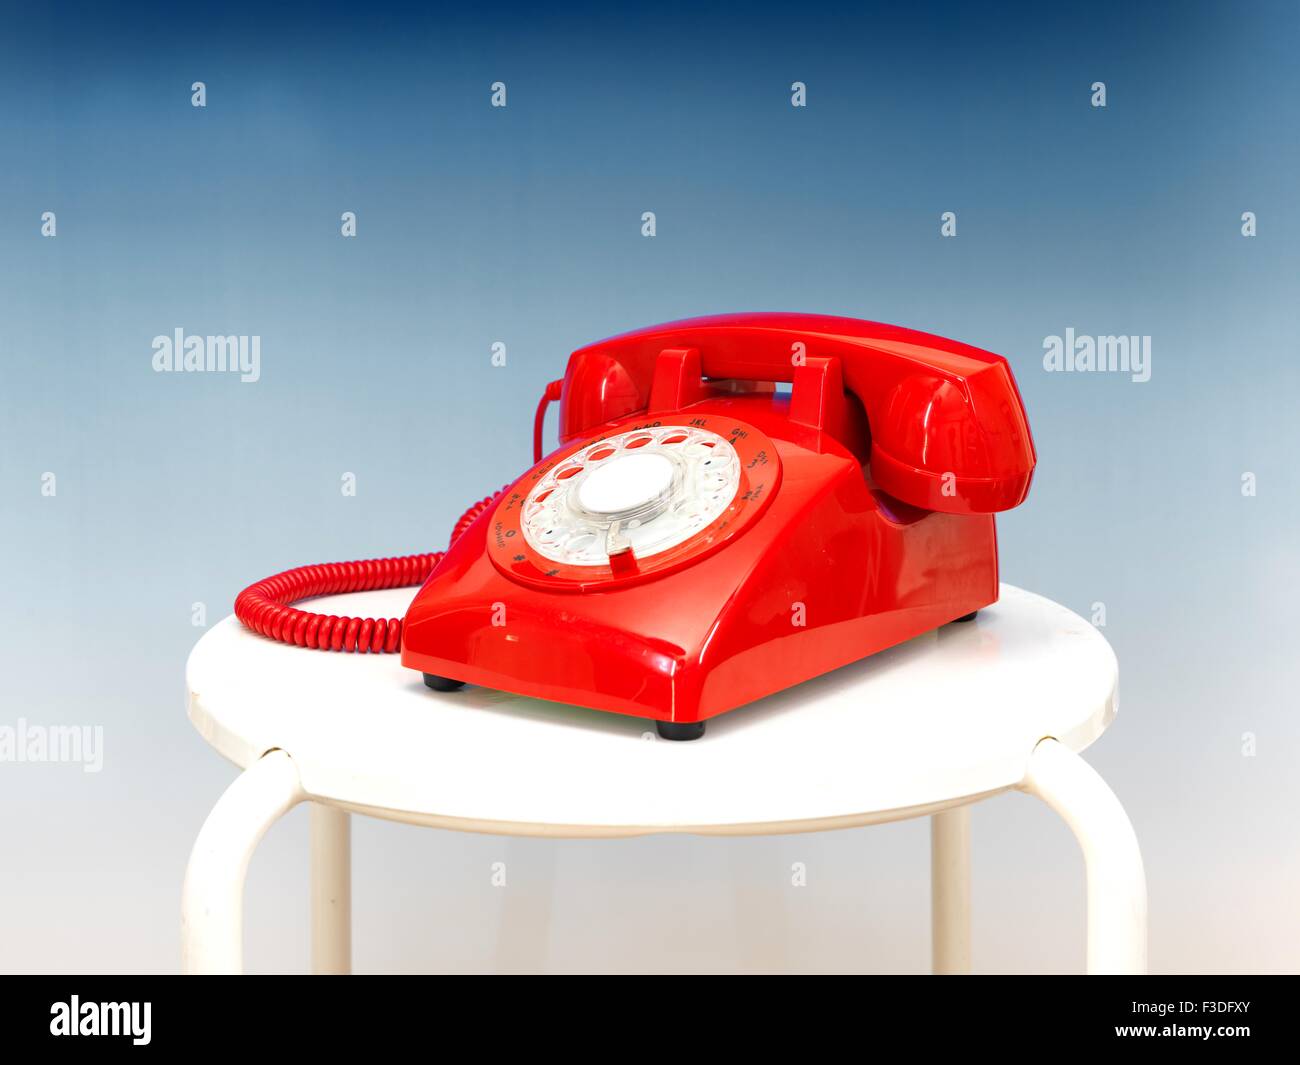 A close up photo of a red rotary phone Stock Photo